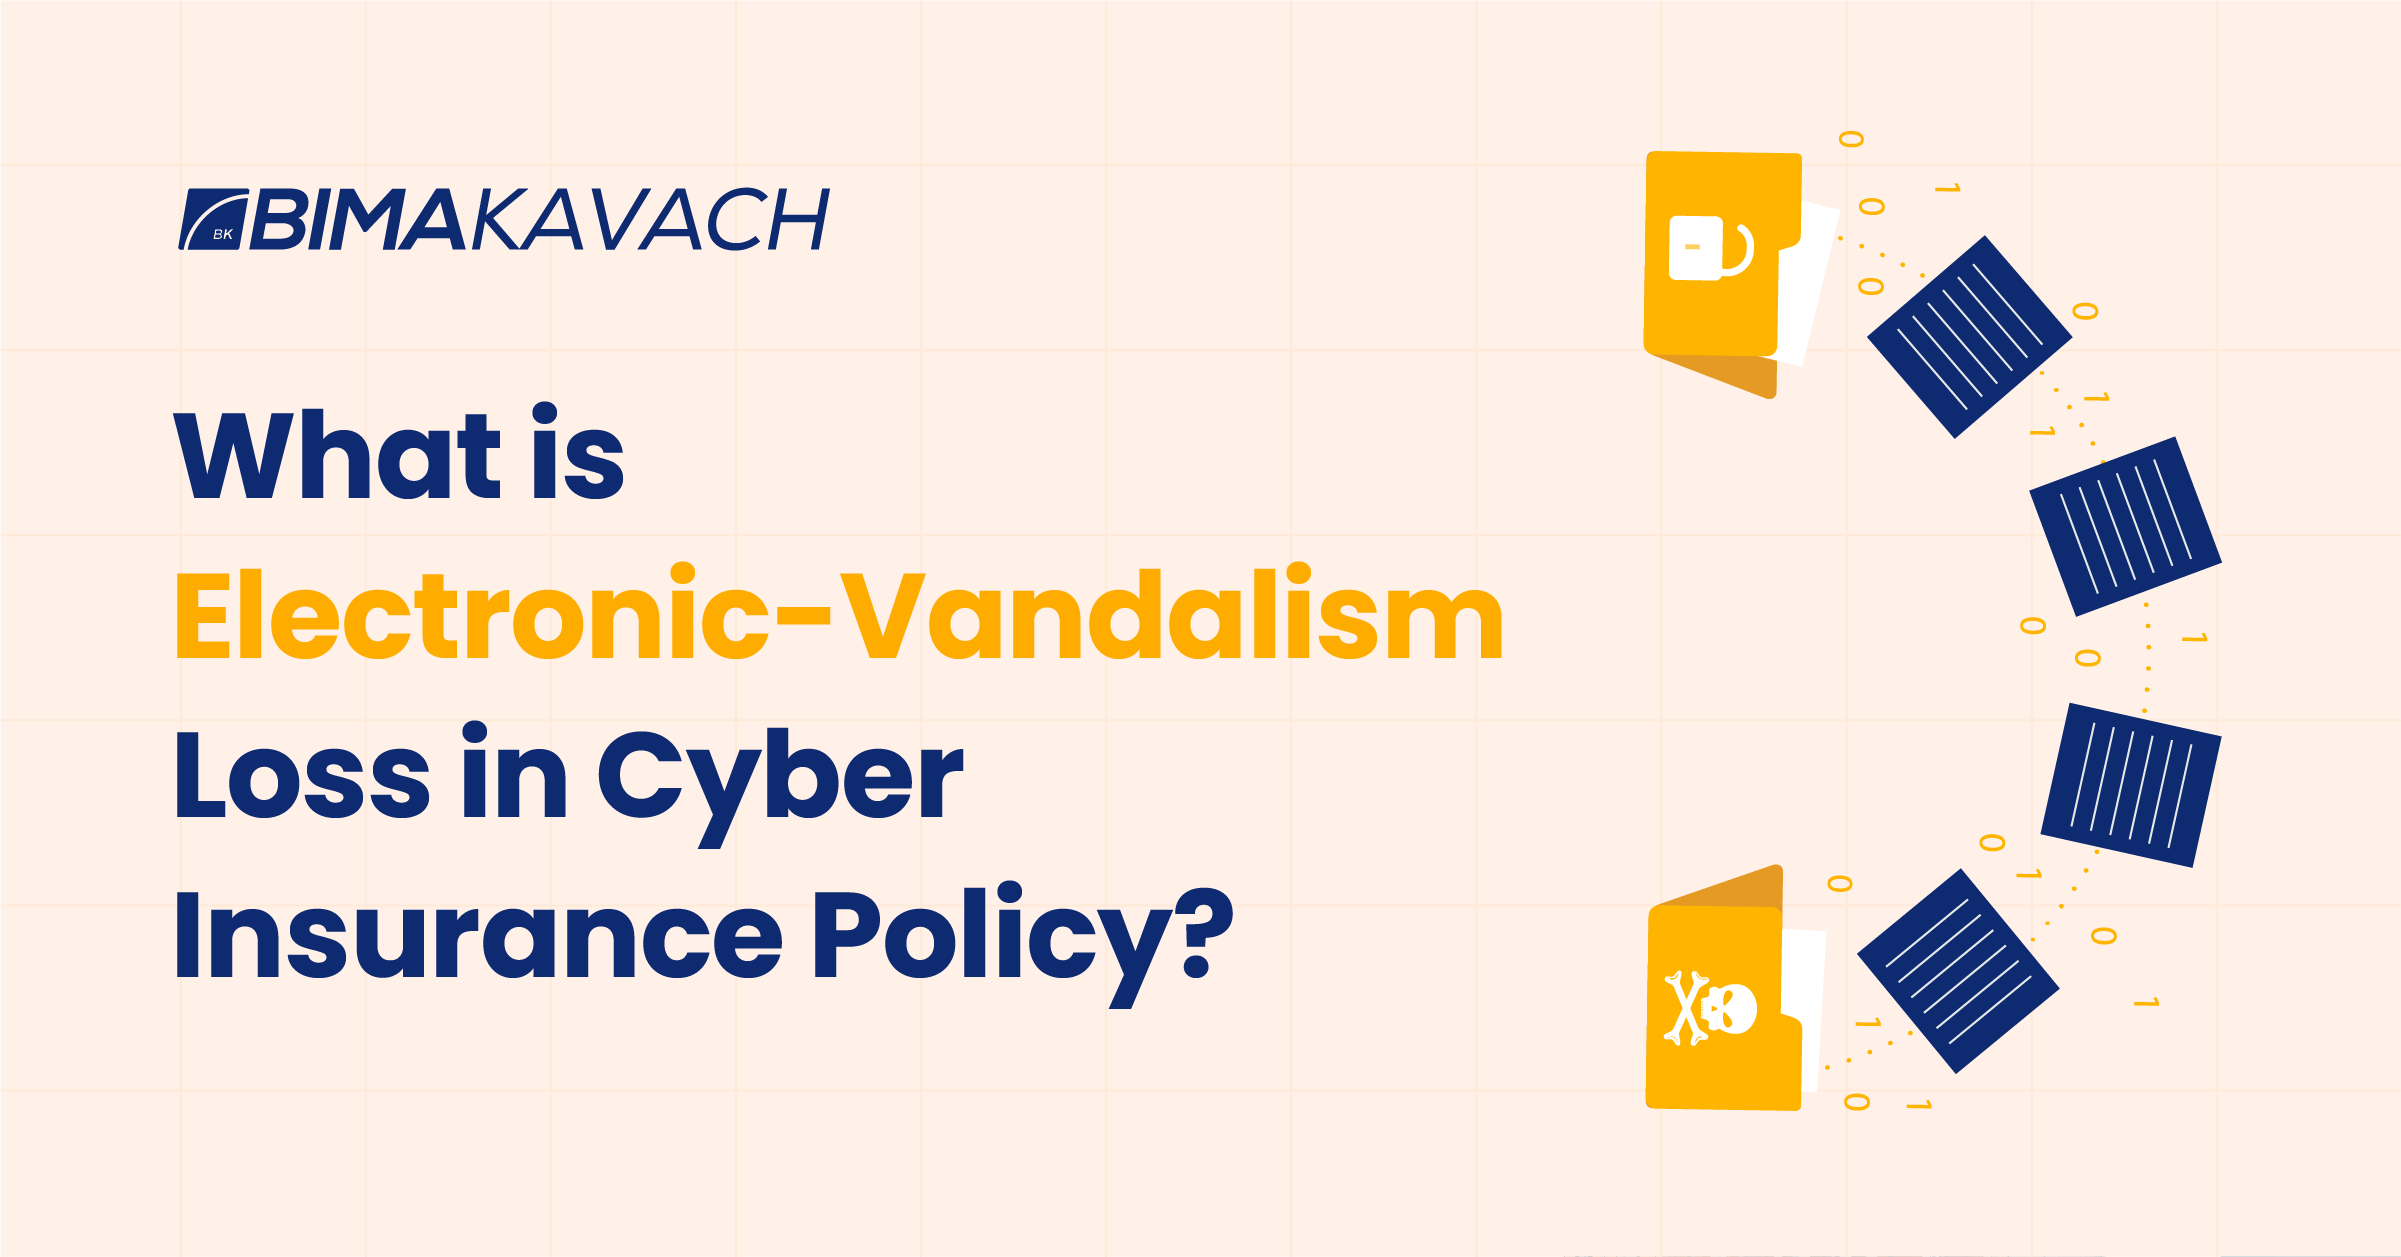 What is Electronic-Vandalism Loss in Cyber Insurance Policy?